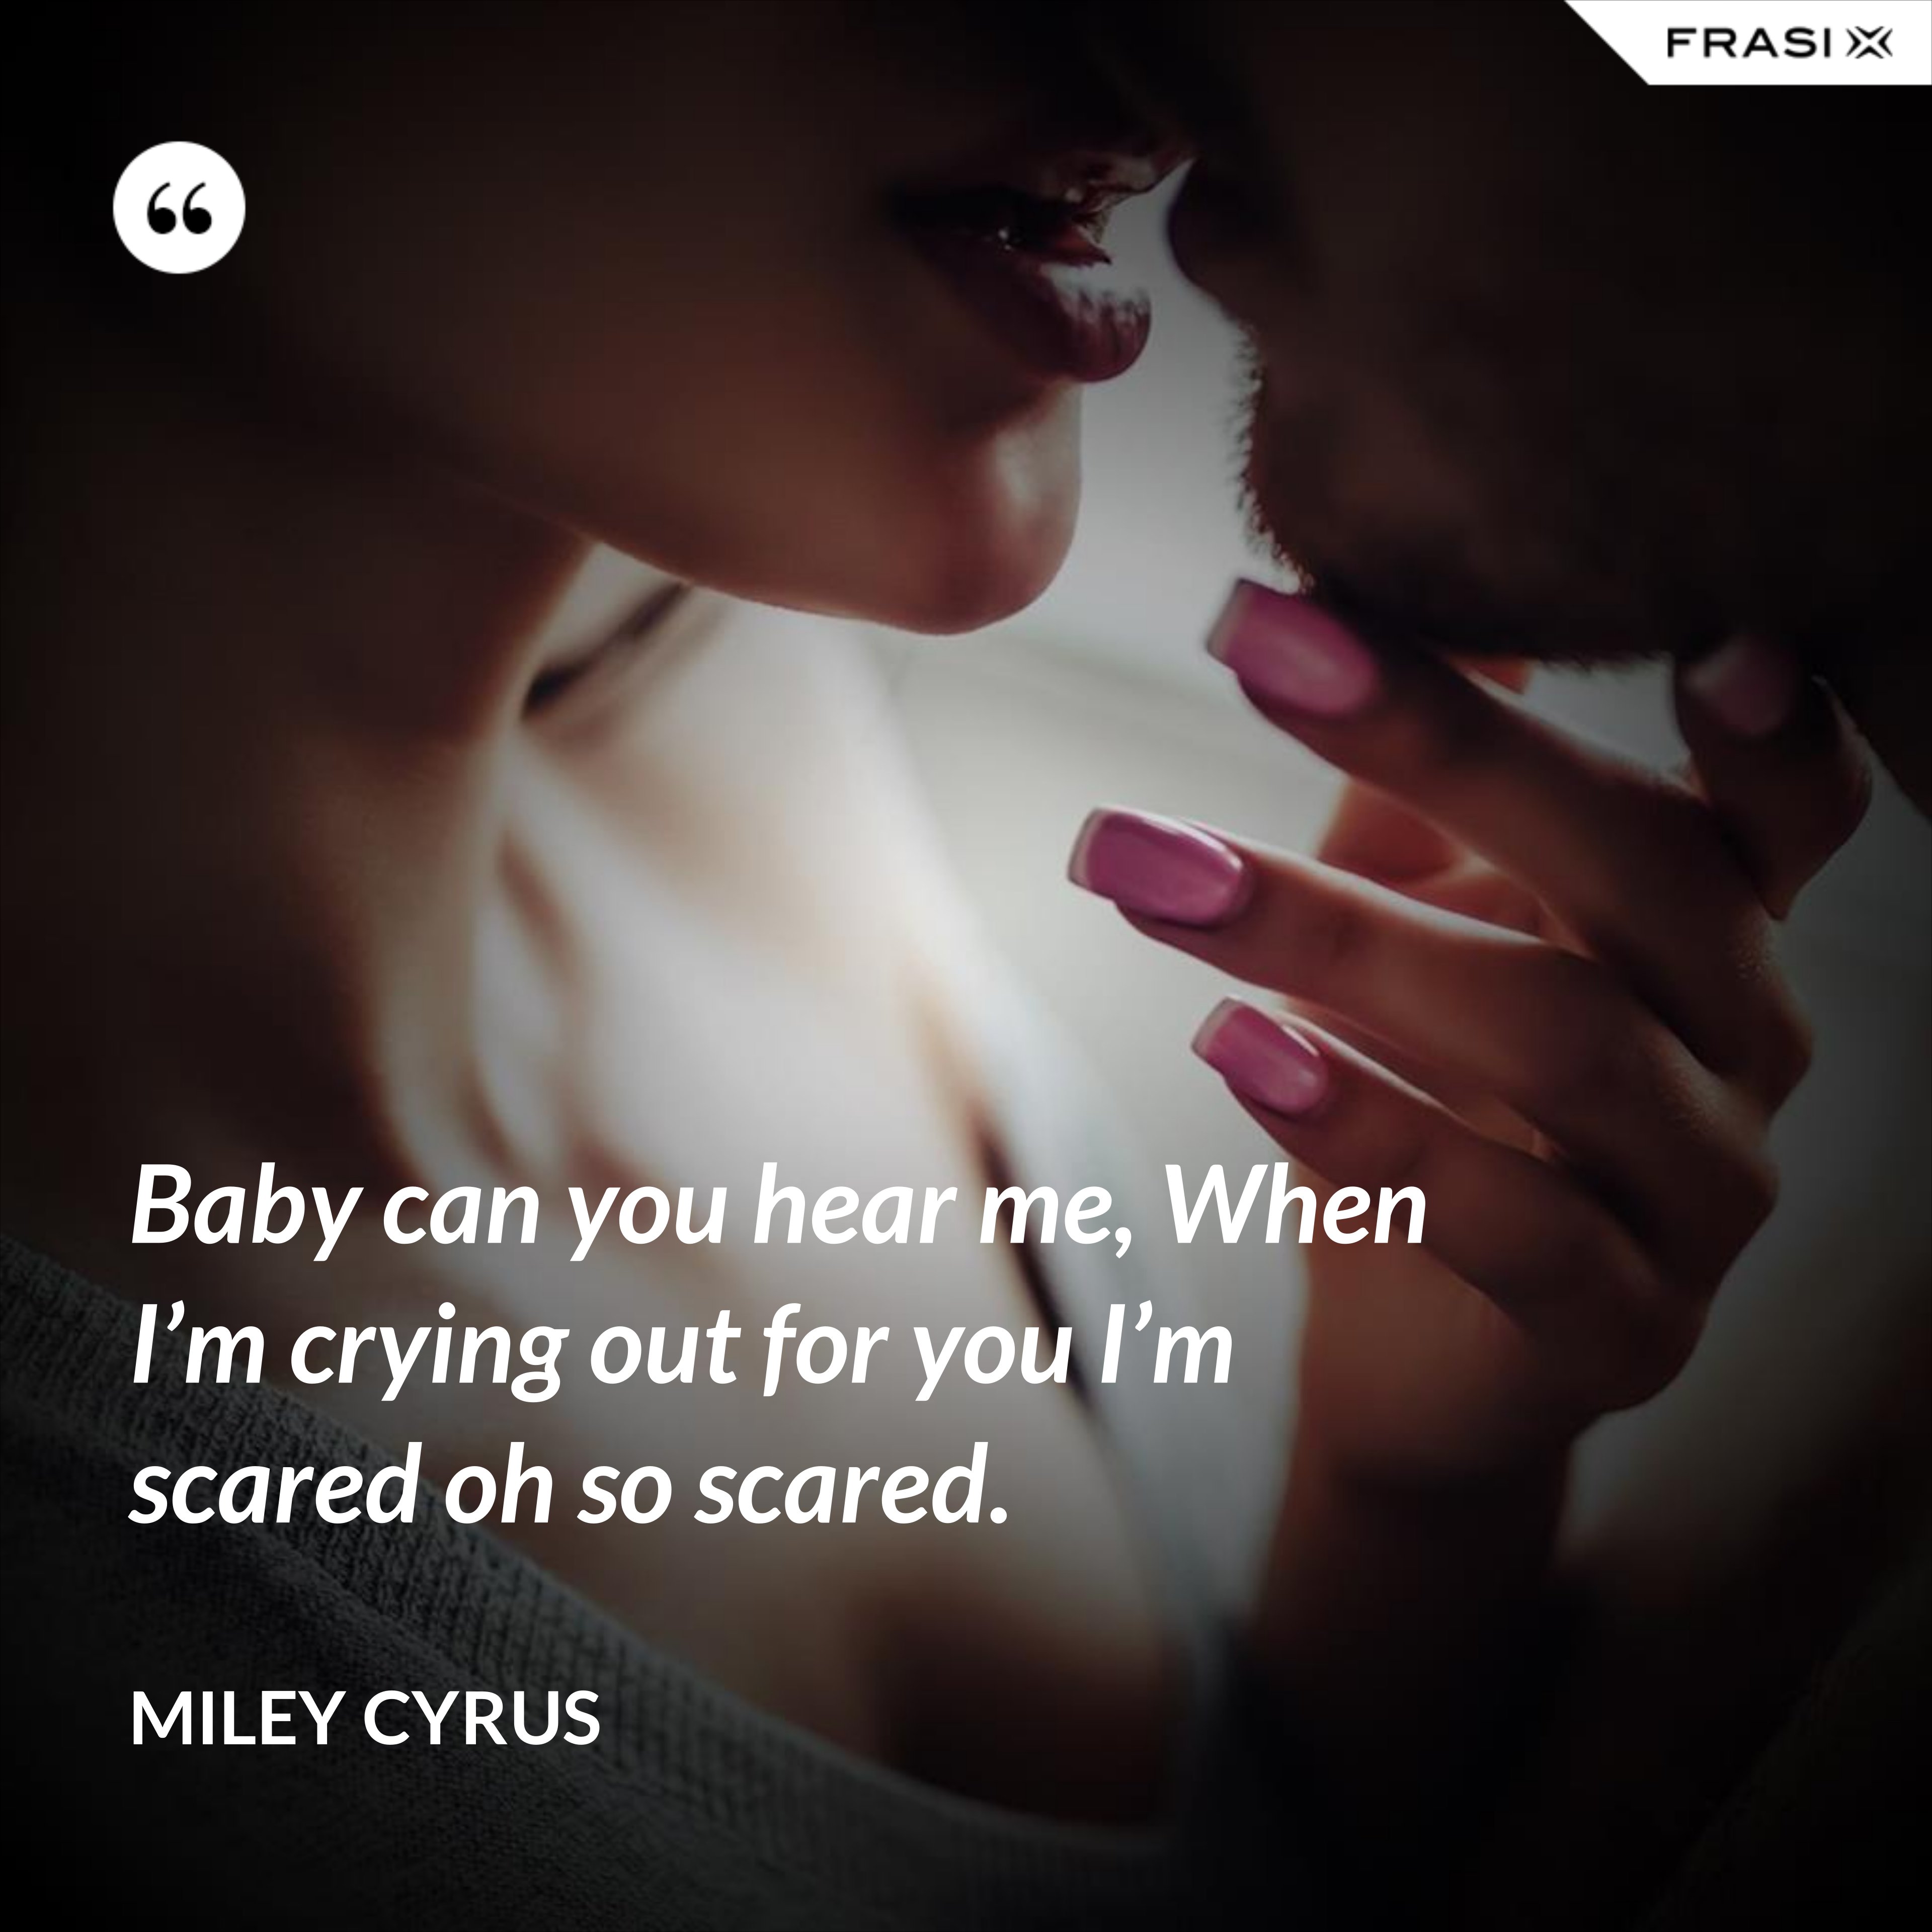 Baby can you hear me, When I’m crying out for you I’m scared oh so scared. - Miley Cyrus